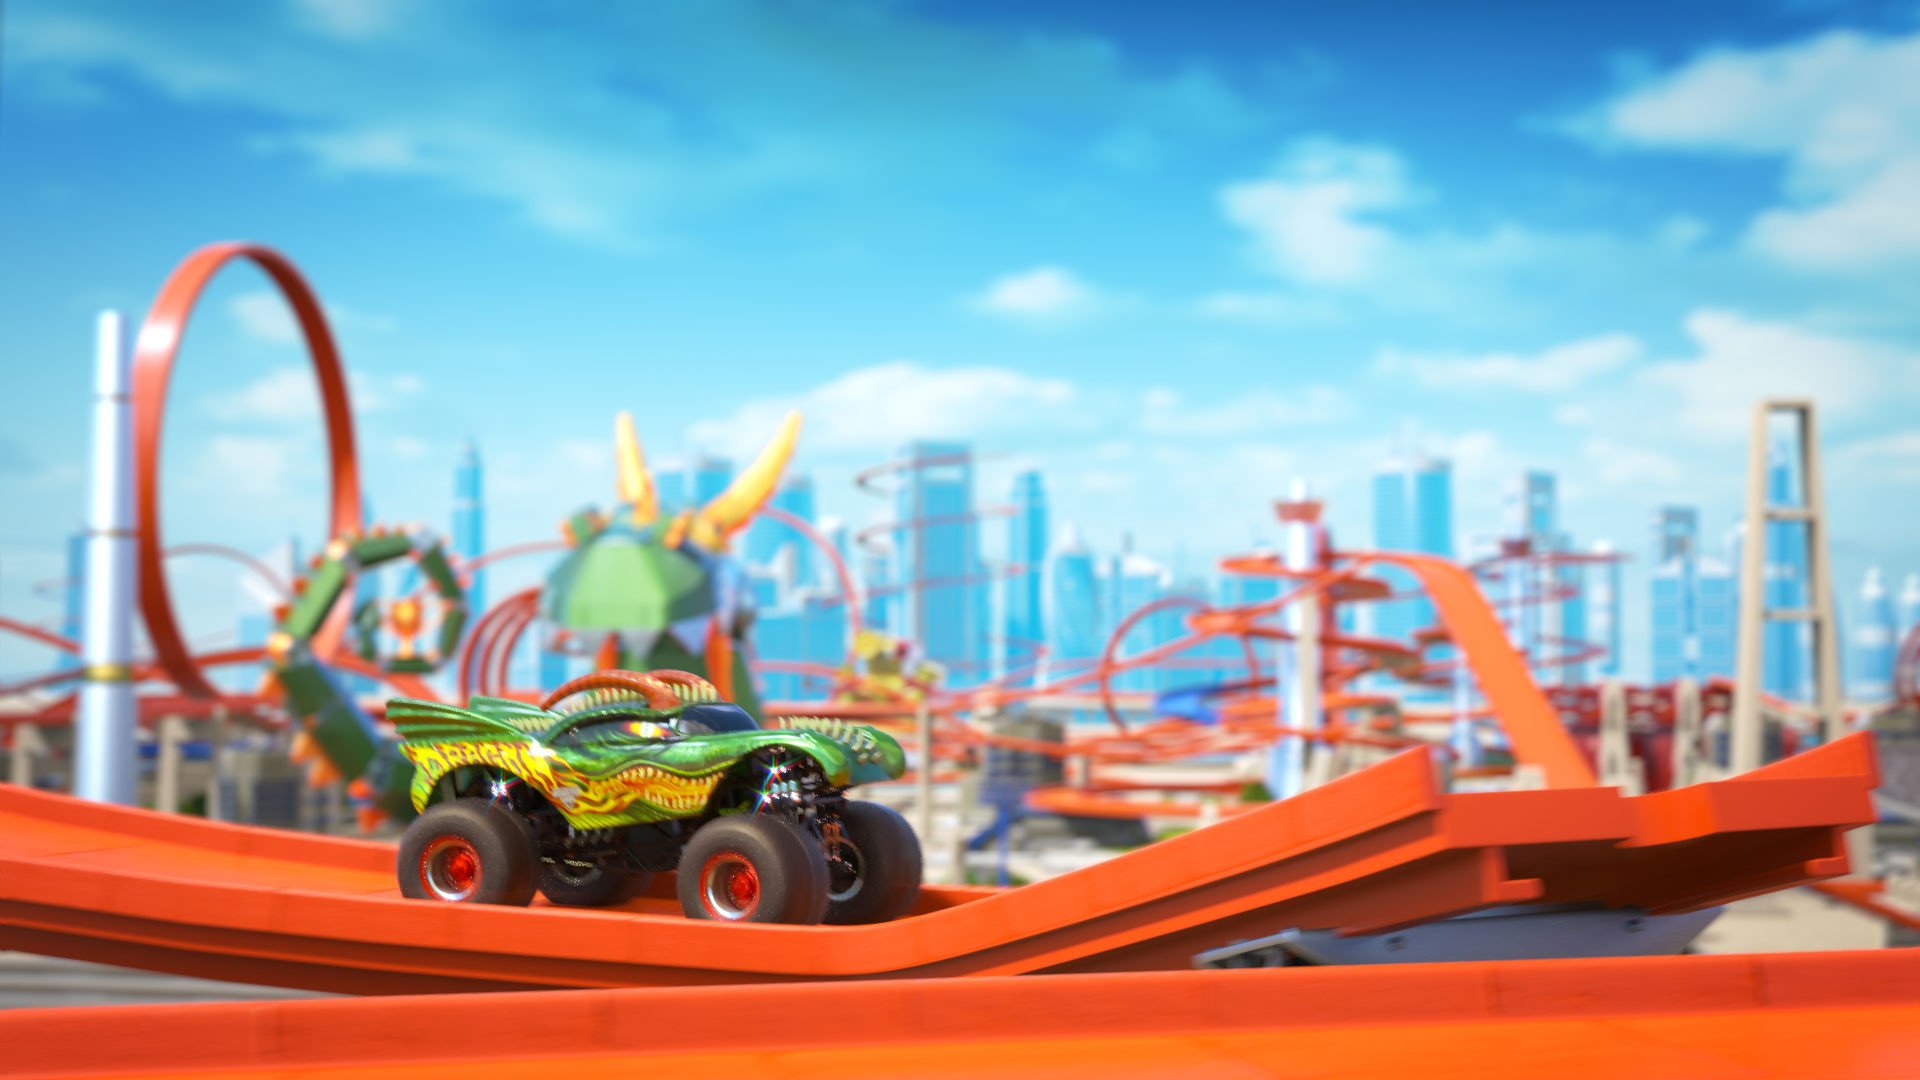 Hot Wheels Wallpapers posted by John Tremblay.